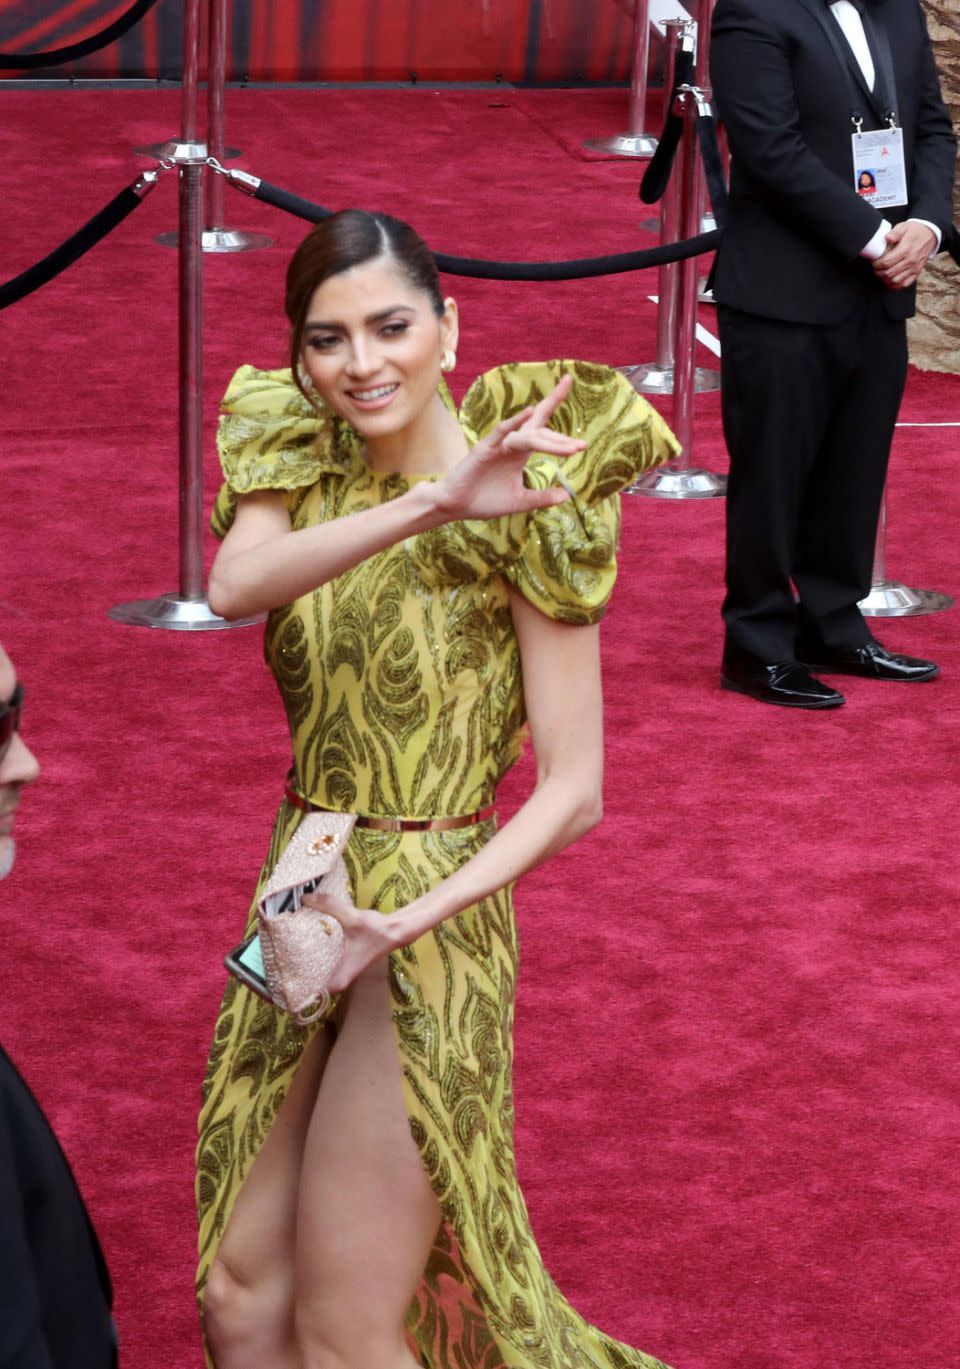 The Teen Star Academy actress arrived at the 2017 Academy Awards, in a floor-length yellow and gold dress that left little to the imagination thanks to an extremely daring side slit. Source: Getty